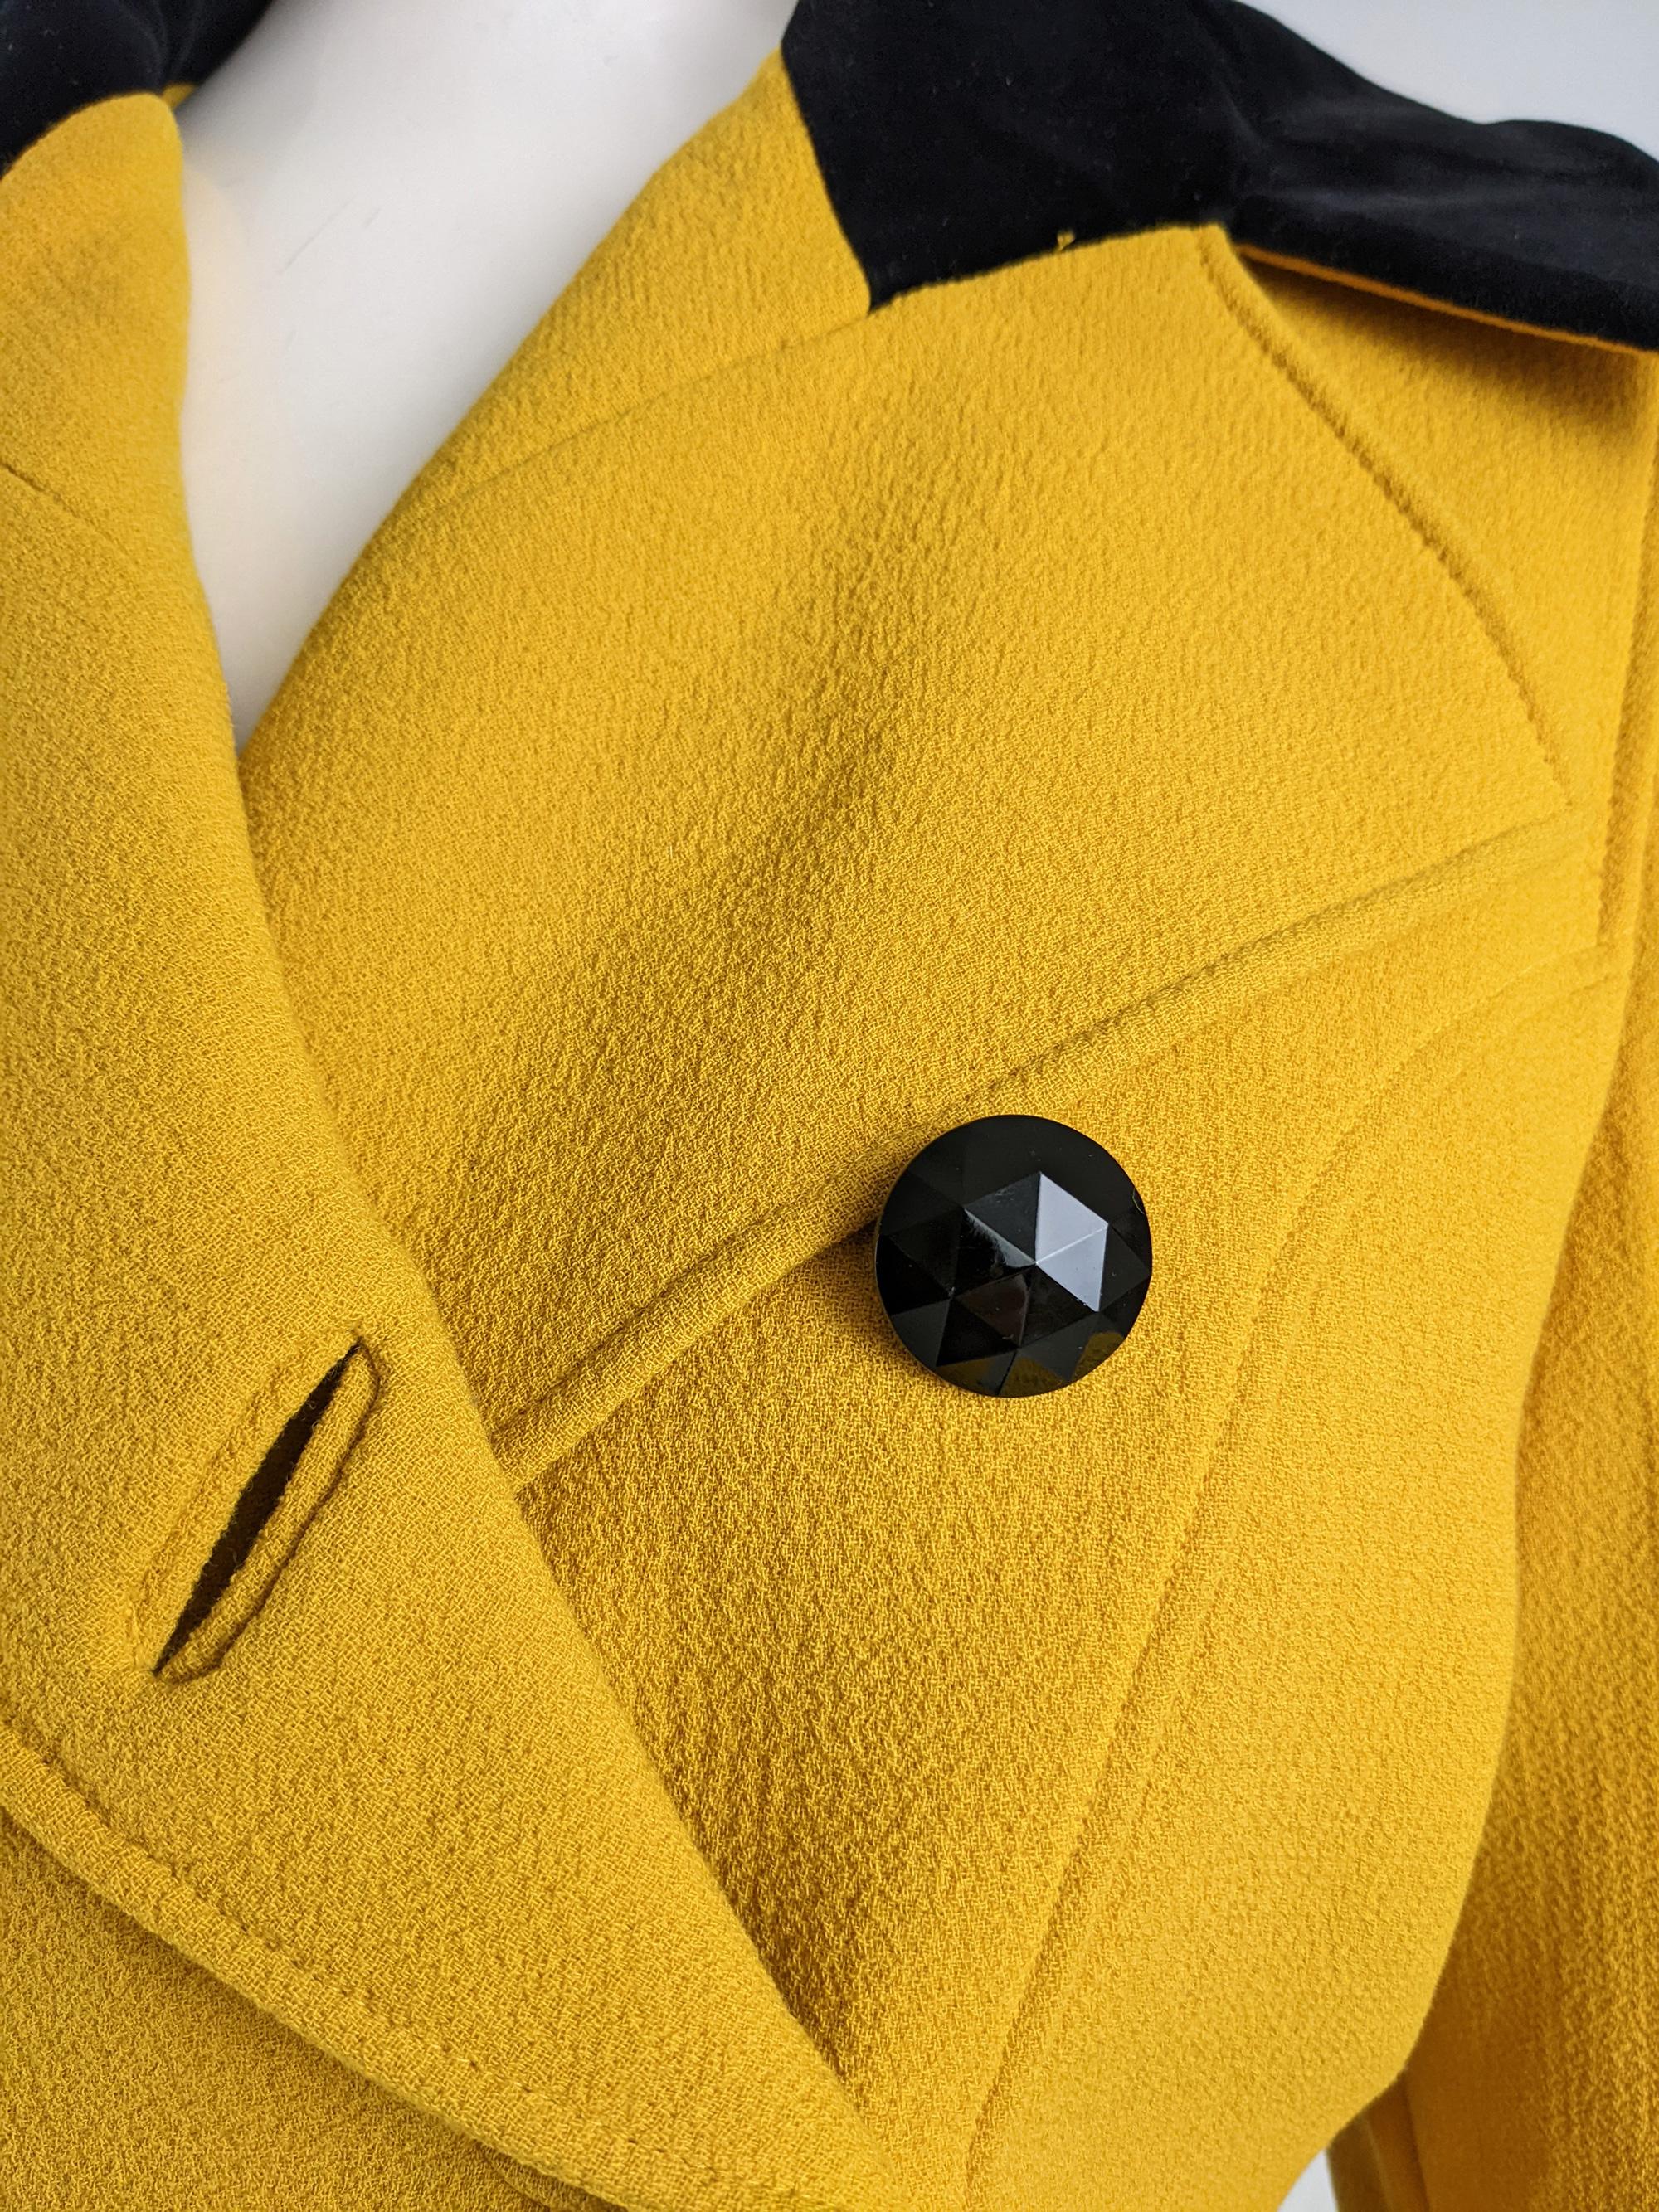 Christian Lacroix Vintage 1980s Mustard Yellow Riding Jacket Victorian Jacket For Sale 3